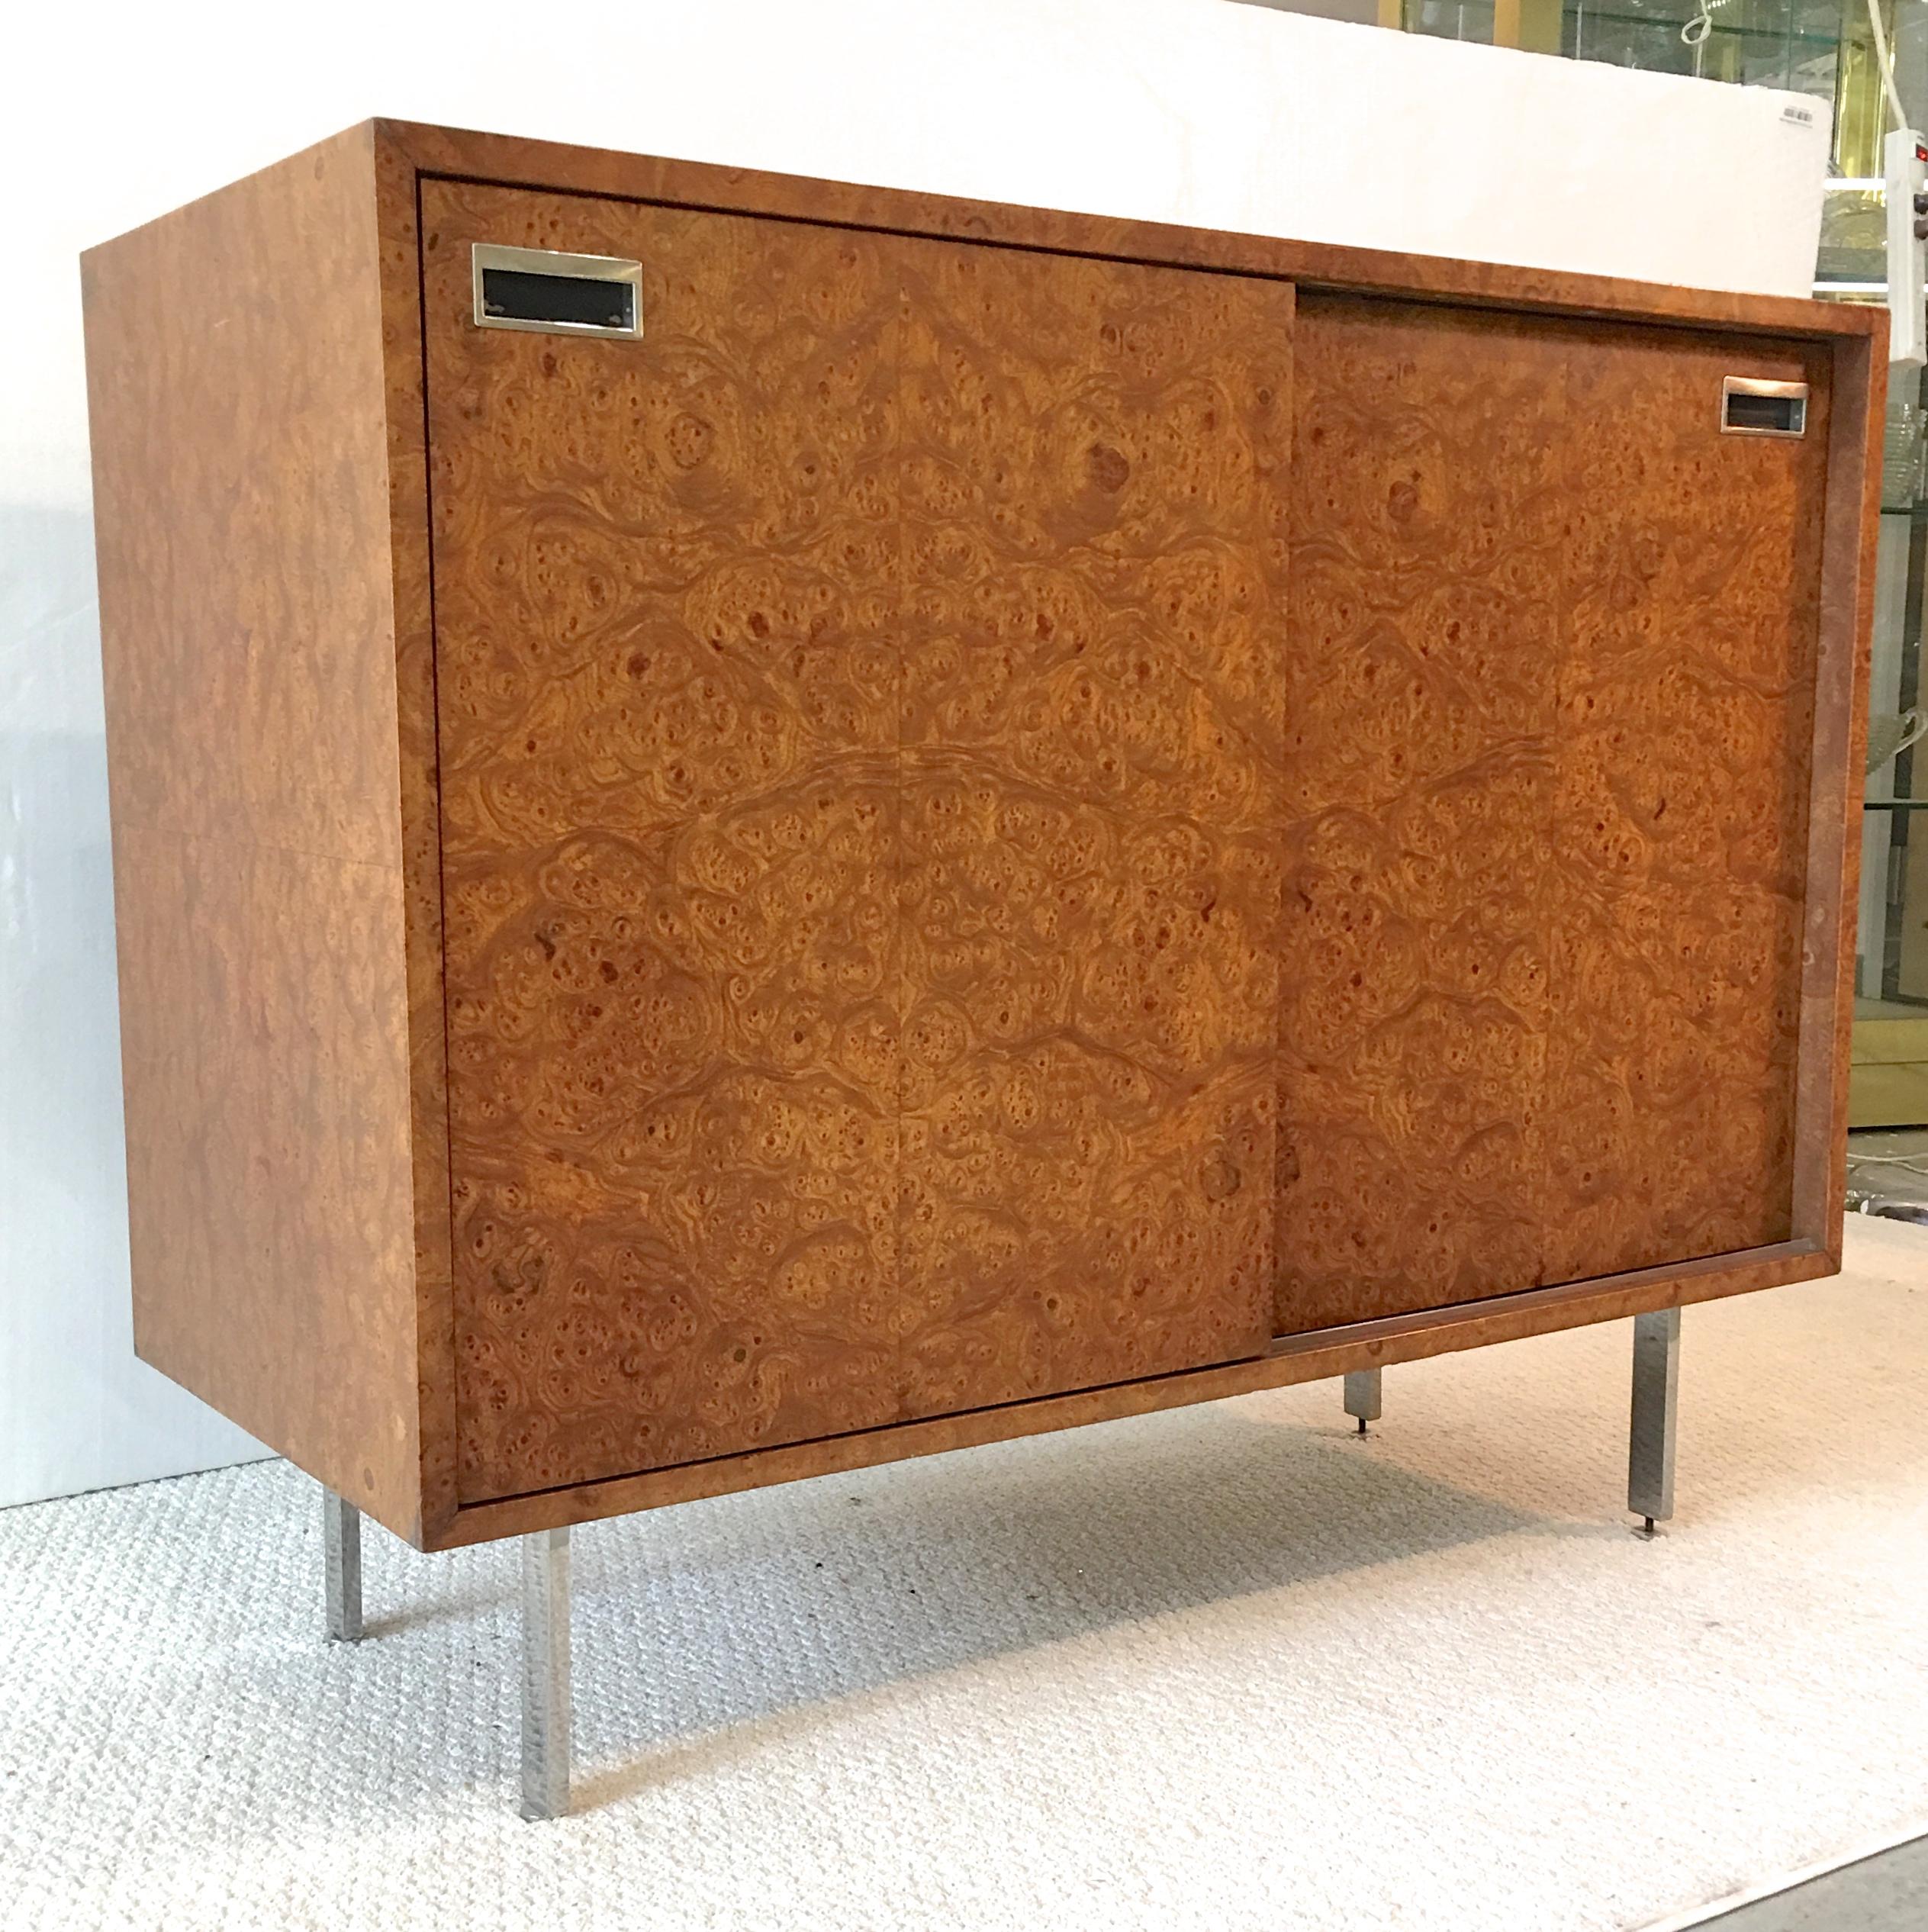 SATURDAY SALE Oct. 2018

Sublimely chic dressing cabinet by Harvey Probber. Olive burl rectangular case with double sliding doors on stunning polished aluminum legs with round levelers. Sliding doors have inset chrome handles with black enamel.